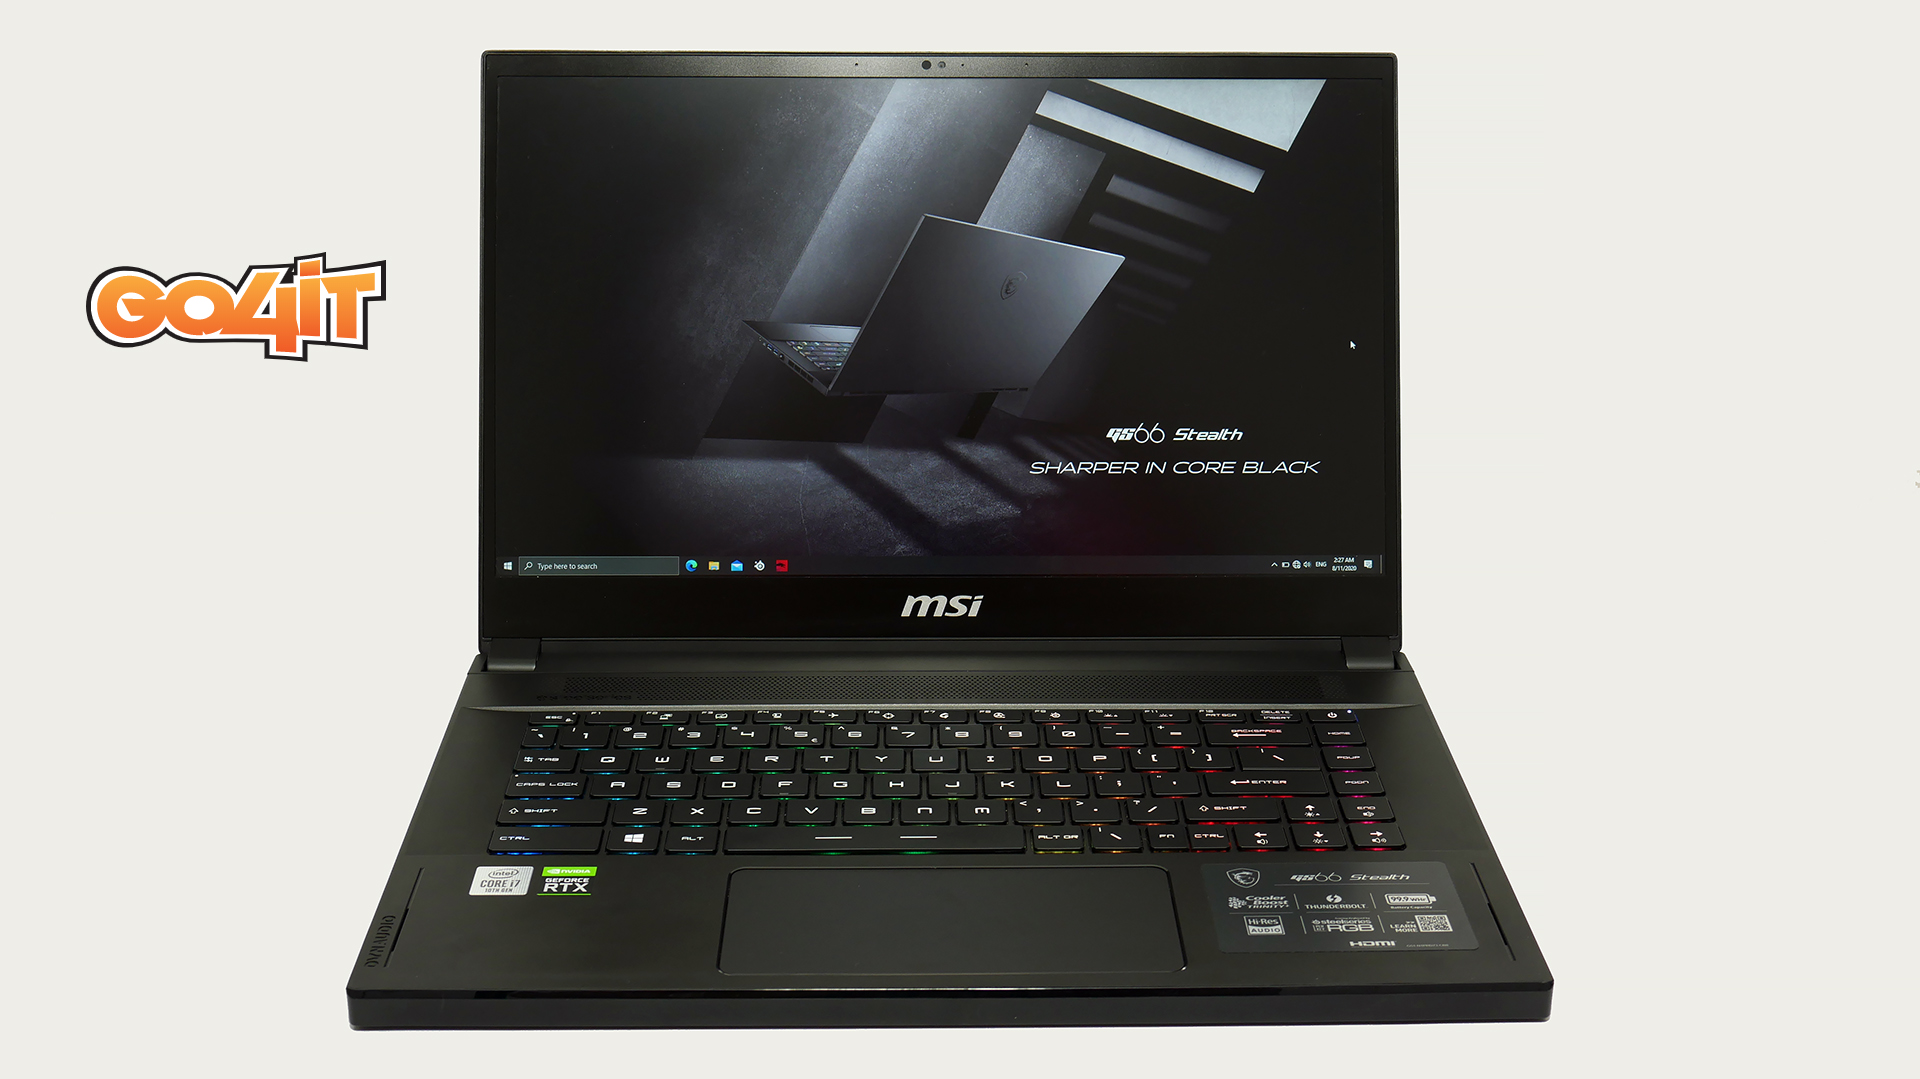 MSI GS66 Stealth front